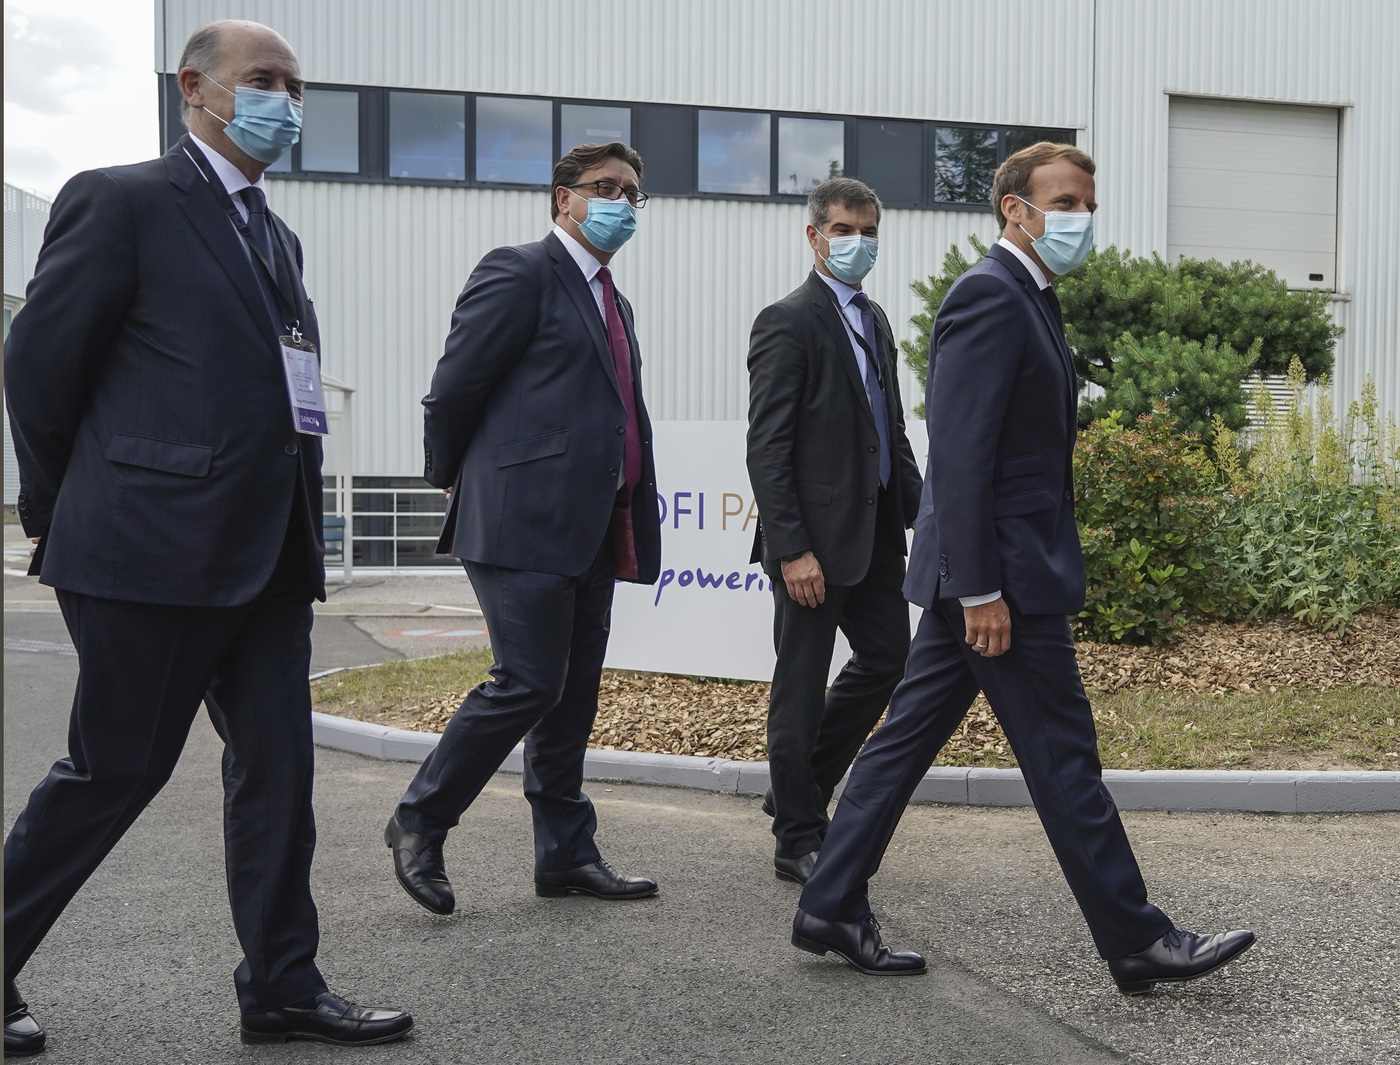 From left to right, Board Director of Sanofi Serge Weinberg, CEO of Sanofi Paul Hudson, President of Sanofi France Olivier Bogillot French President Emmanuel Macron and arrive at the French drugmaker's vaccine unit Sanofi Pasteur plant in Marcy-l'Etoile, near Lyon, central France, Tuesday, June 16, 2020.The visit comes after rival pharmaceutical company AstraZeneca this weekend announced a deal to supply 400 million vaccine doses to EU countries, including France. (AP Photo/Laurent Cipriani, Pool)